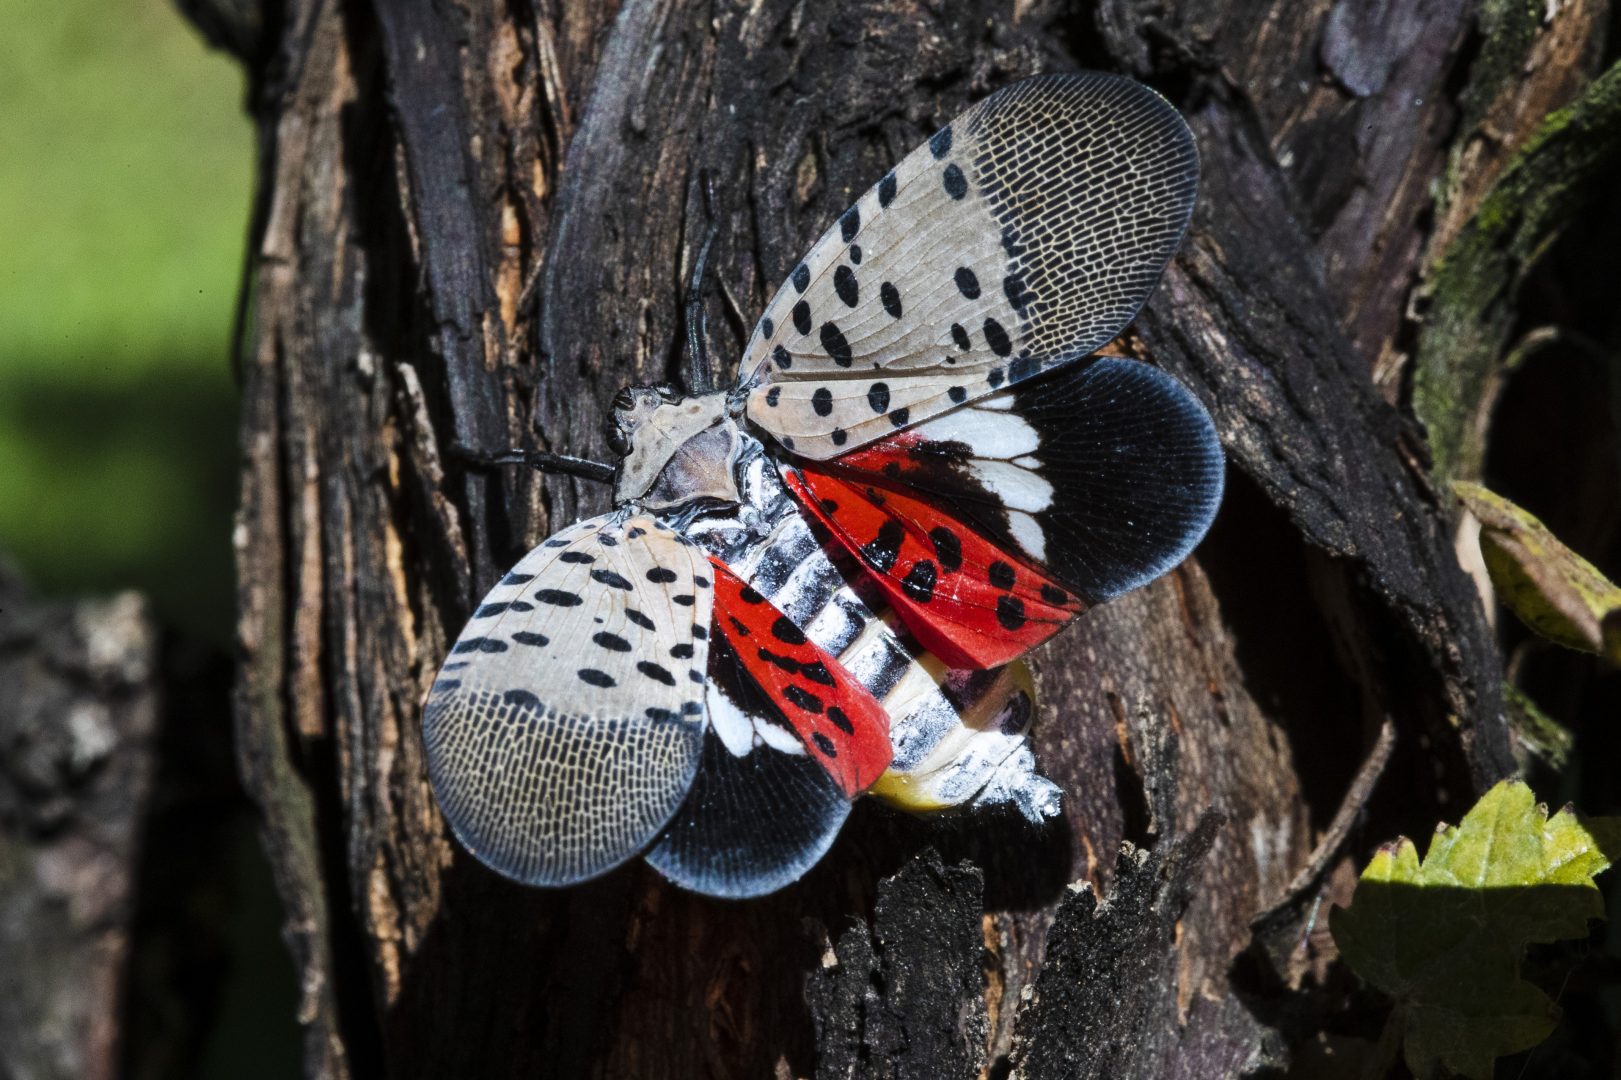 This Thursday, Sept. 19, 2019, photo shows a spotted lanternfly at a vineyard in Kutztown, Pa. The spotted lanternfly has emerged as a serious pest since the federal government confirmed its arrival in southeastern Pennsylvania five years ago this week. 